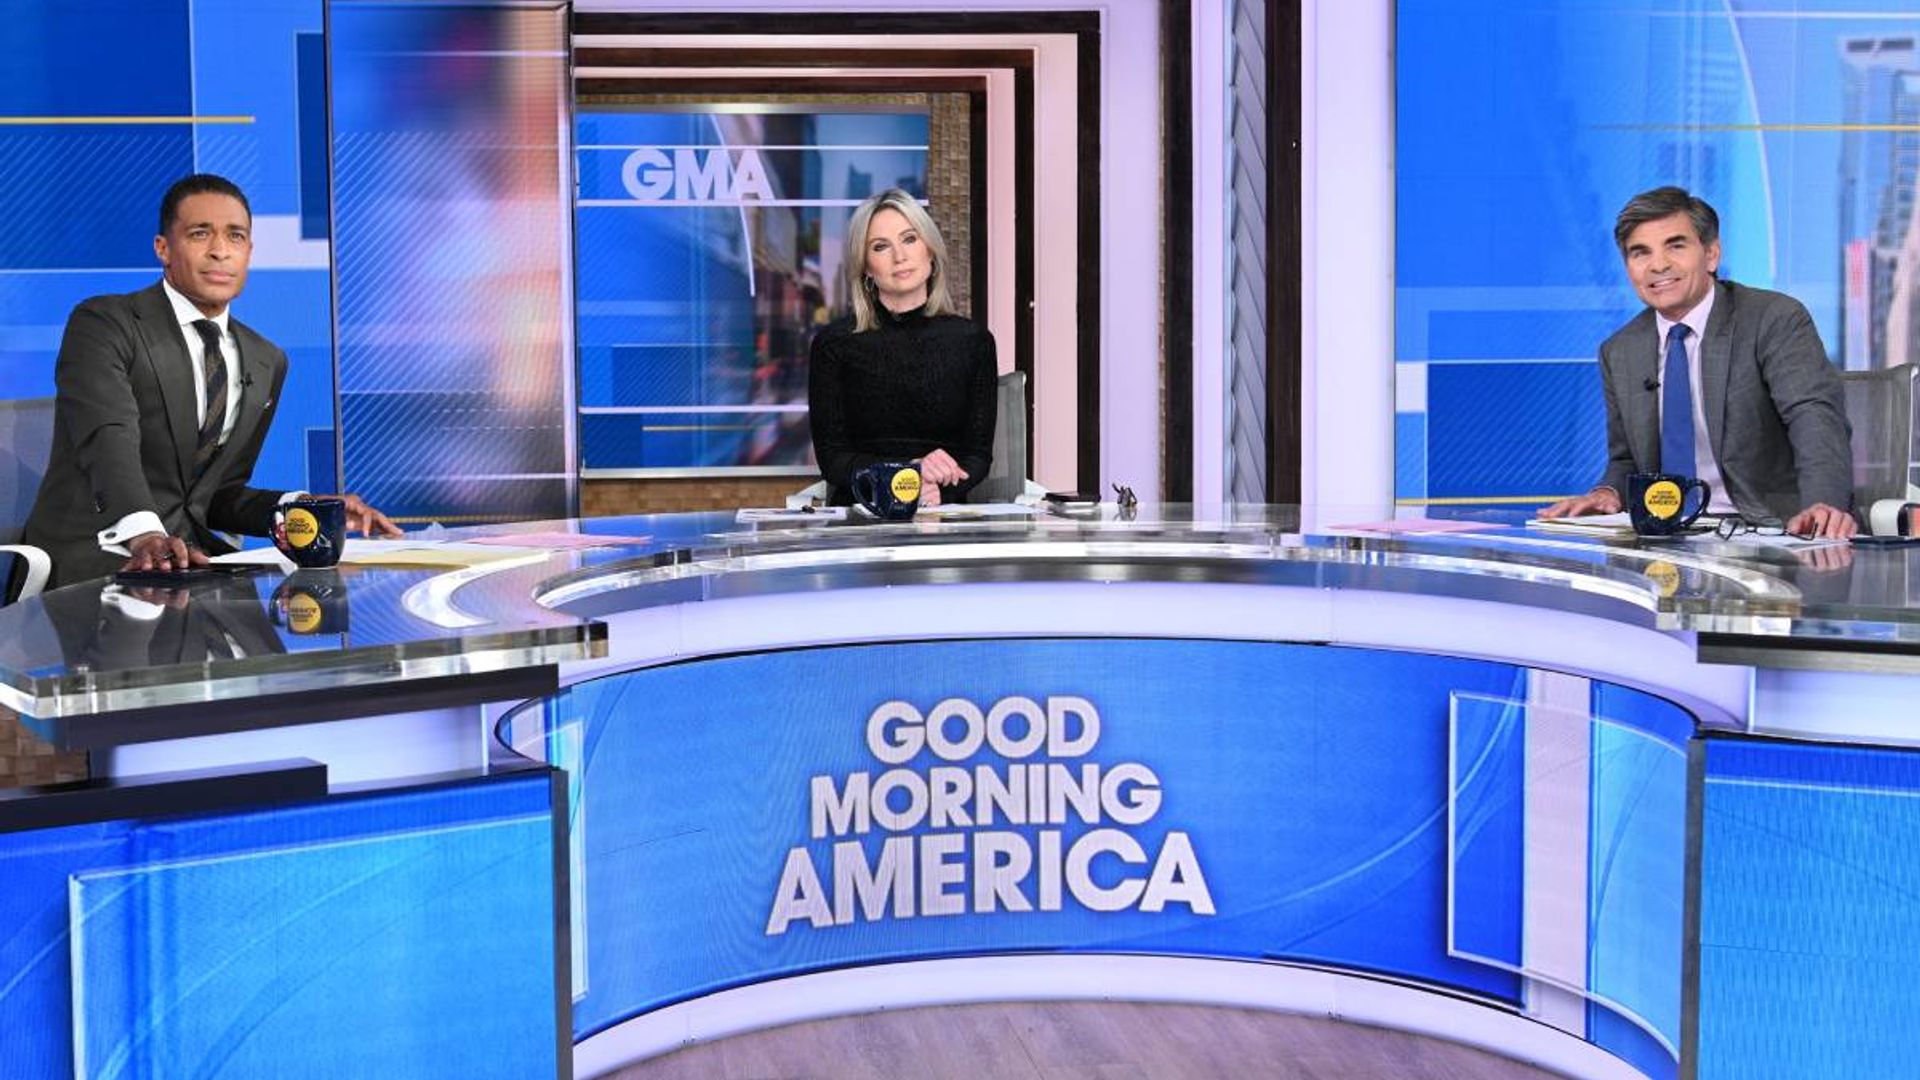 gma-t-j-holmes-inundated-with-support-news-co-star